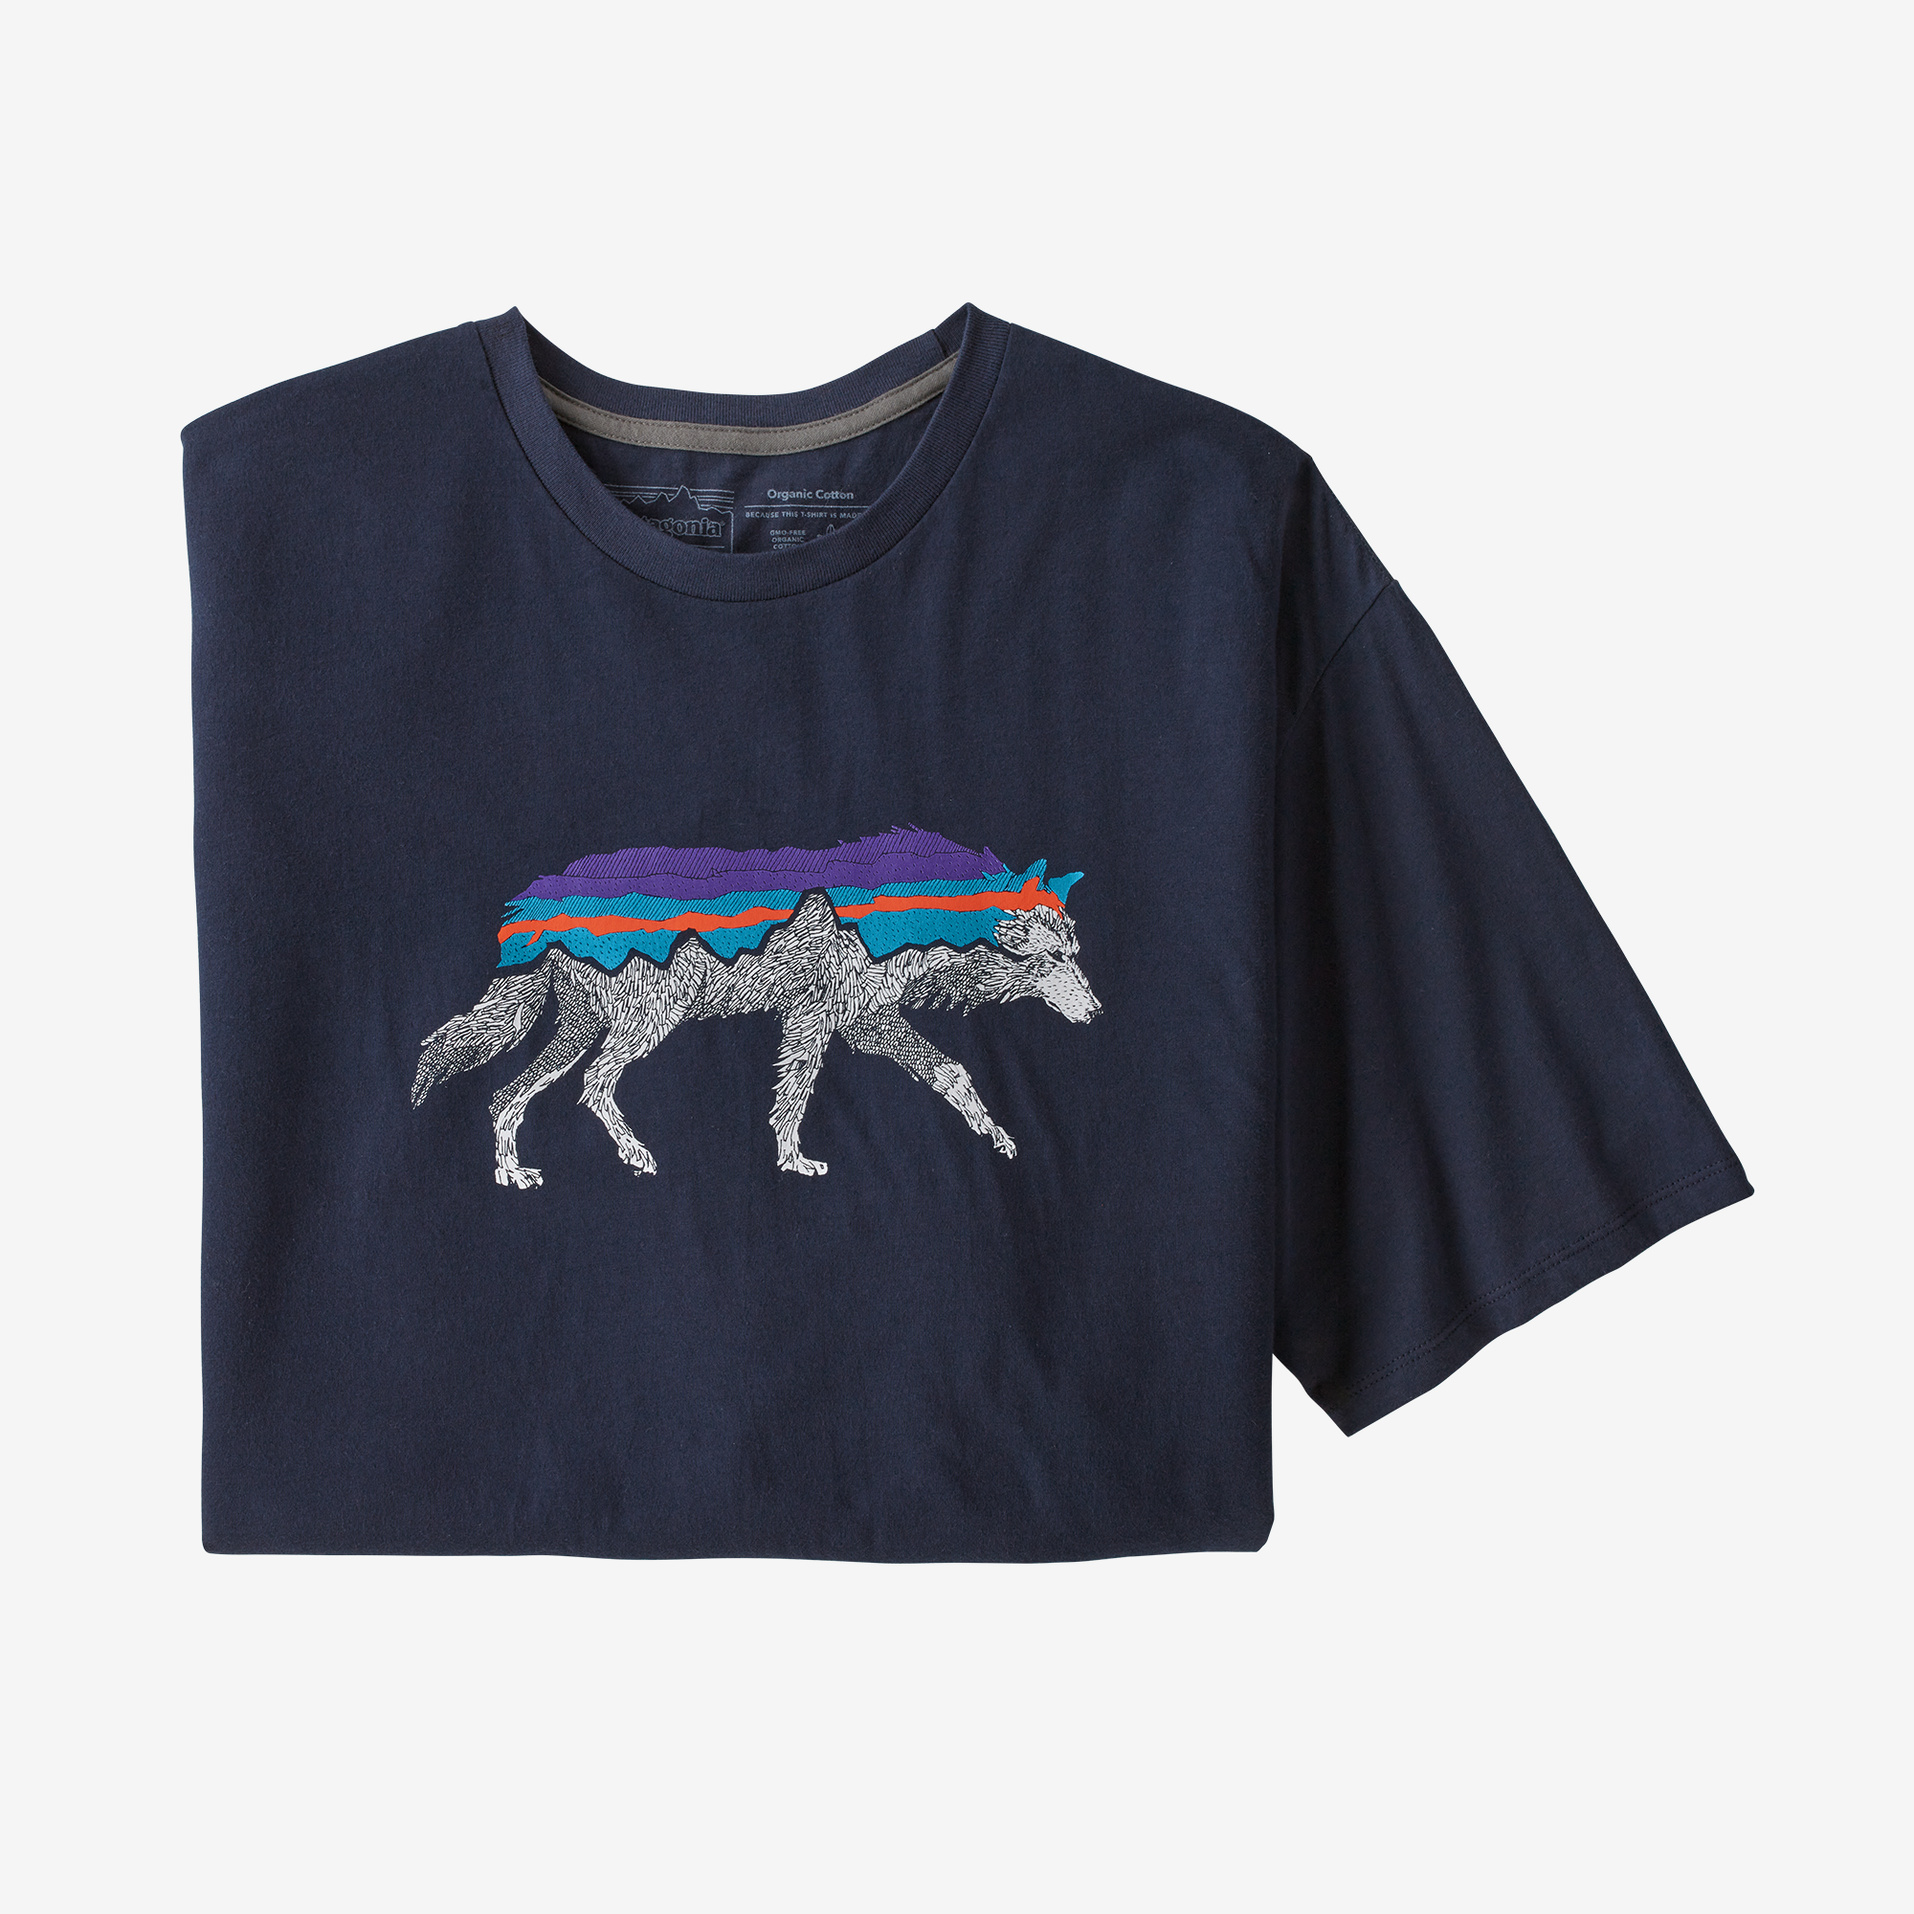 Patagonia M's Back For Good Organic T-Shirt - New Navy w/ Wolf - Large